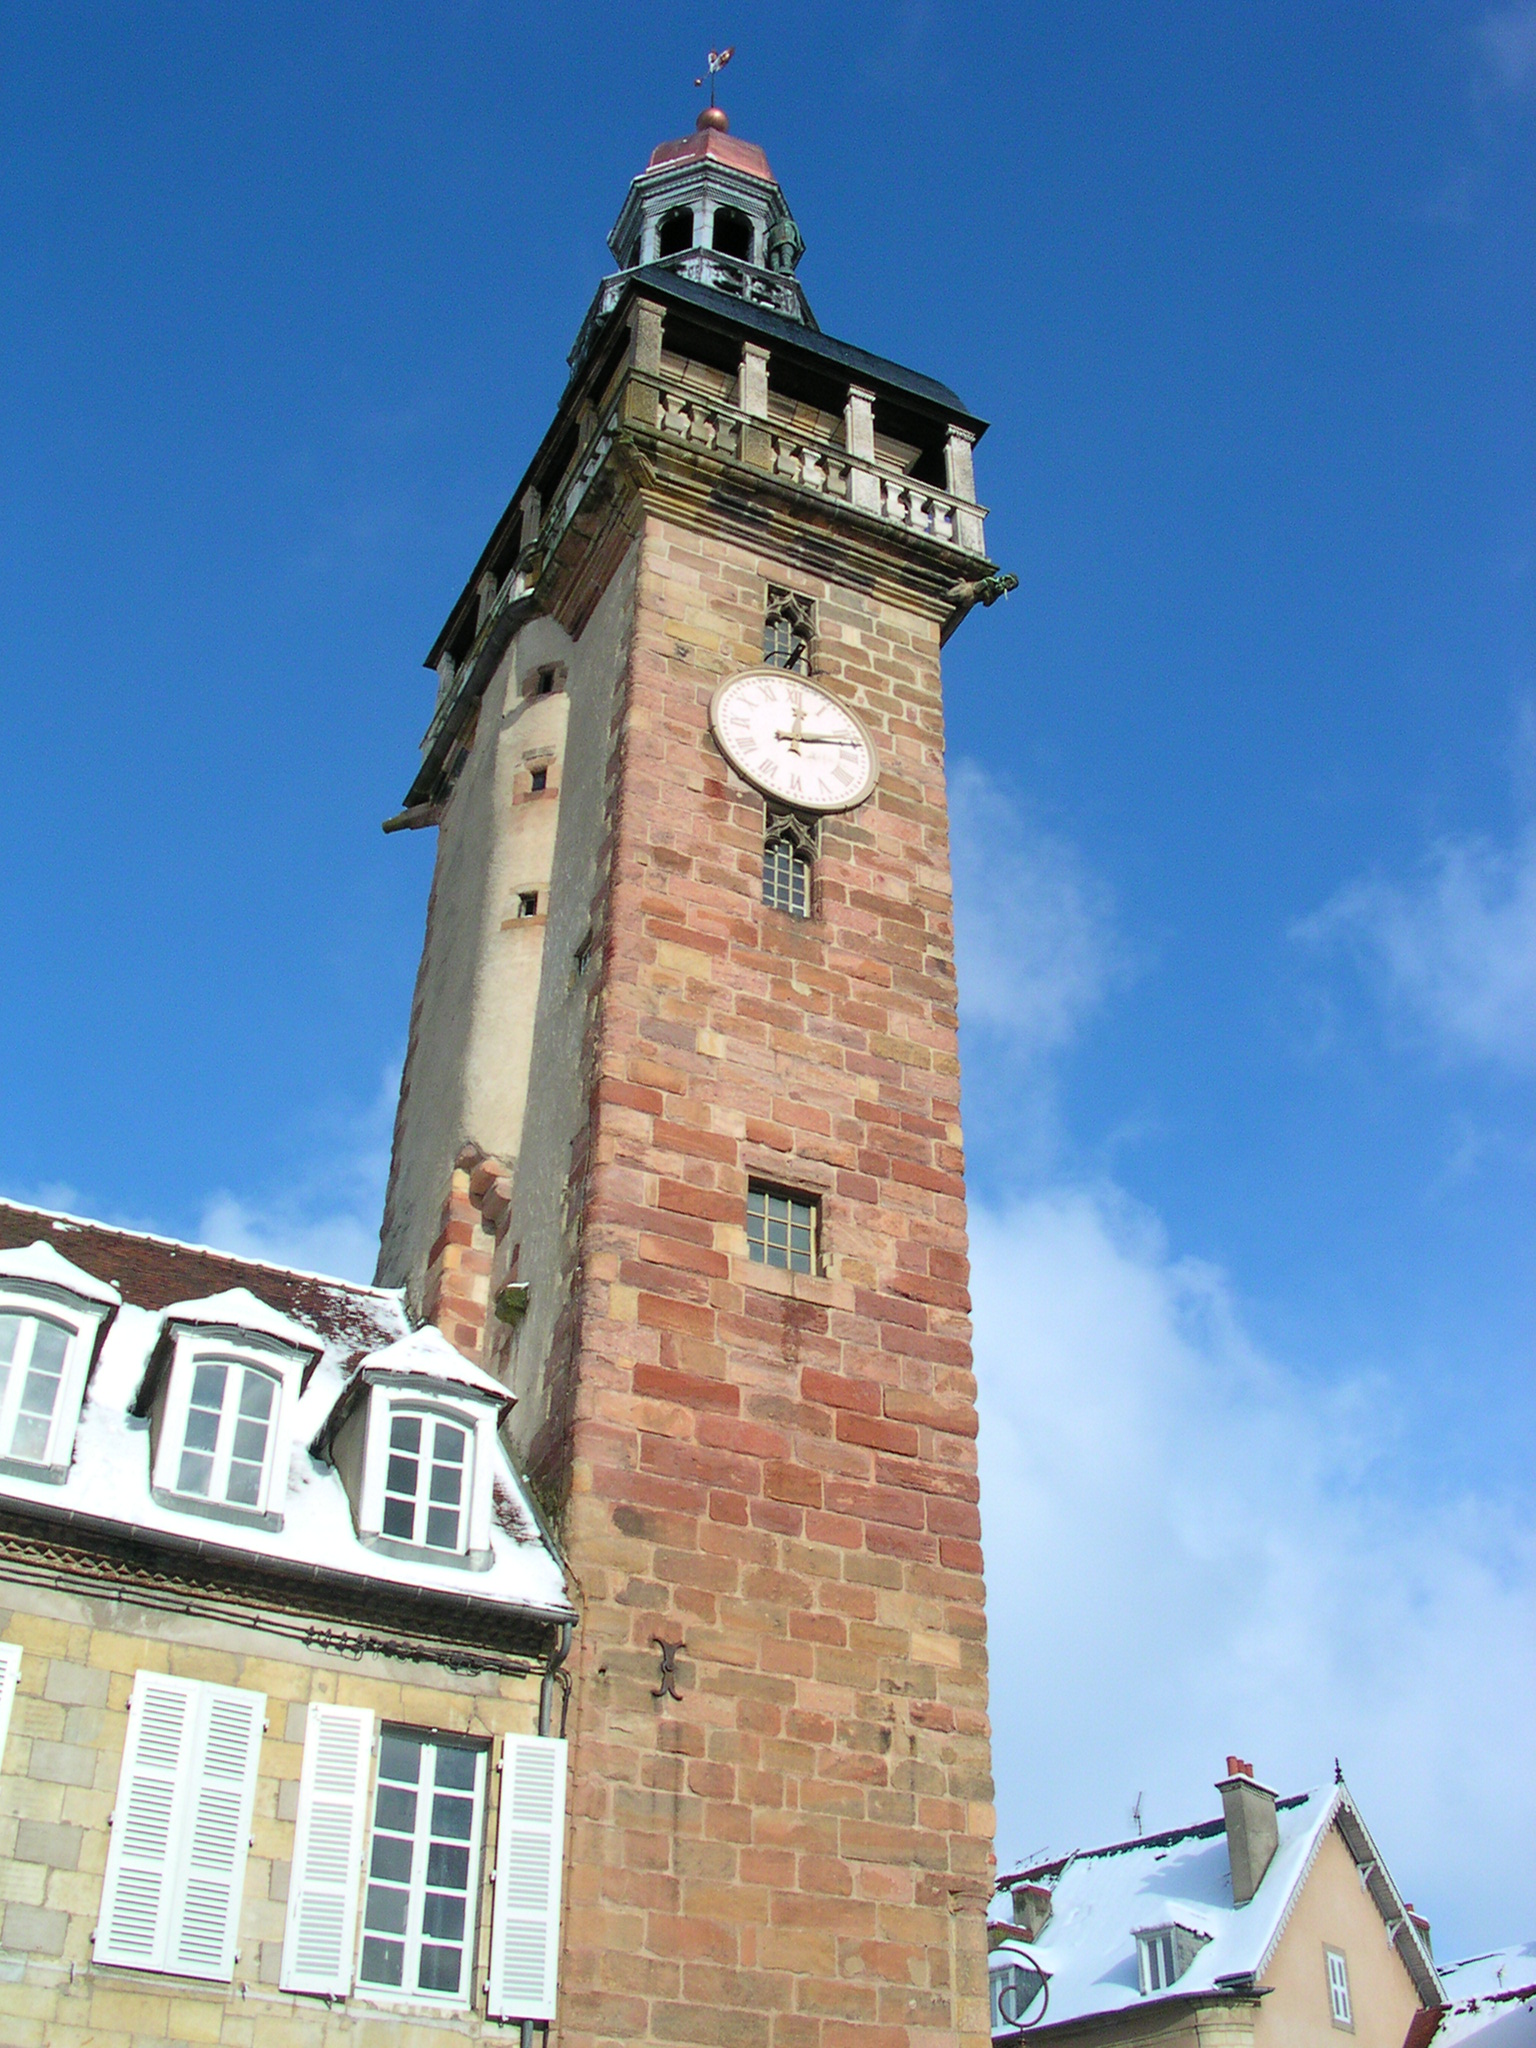 a clock tower with white shutters on a sunny day